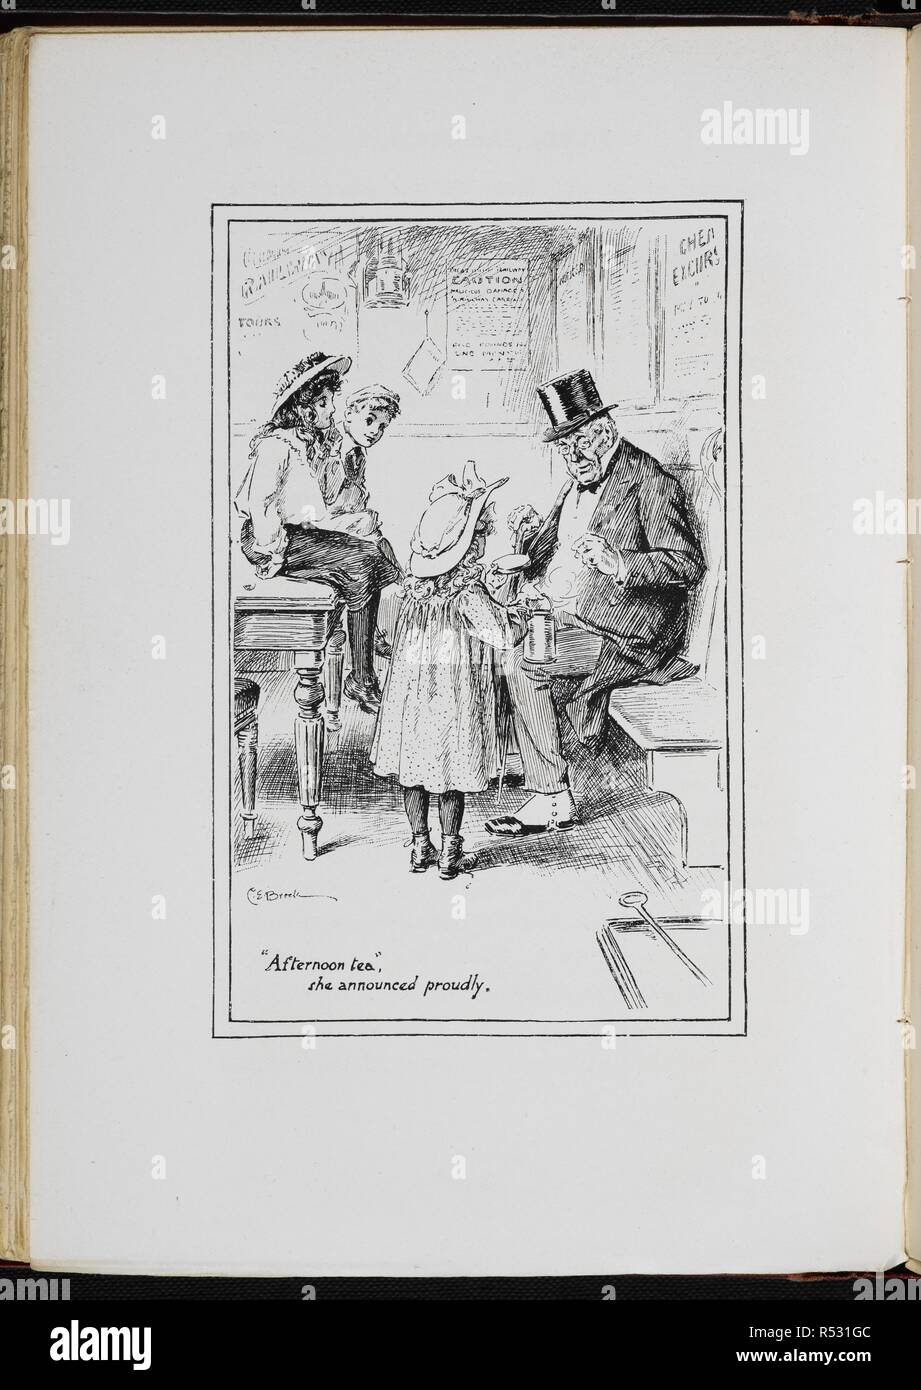 'Afternoon tea', she announced proudly. The Railway Children With drawings by C E Brock. London : Wells Gardner & Co., 1906. Source: 12813.y.7 page 155. Language: English. Author: Brock, Charles Edmund. Nesbit, afterwards Bland, Edith. Stock Photo